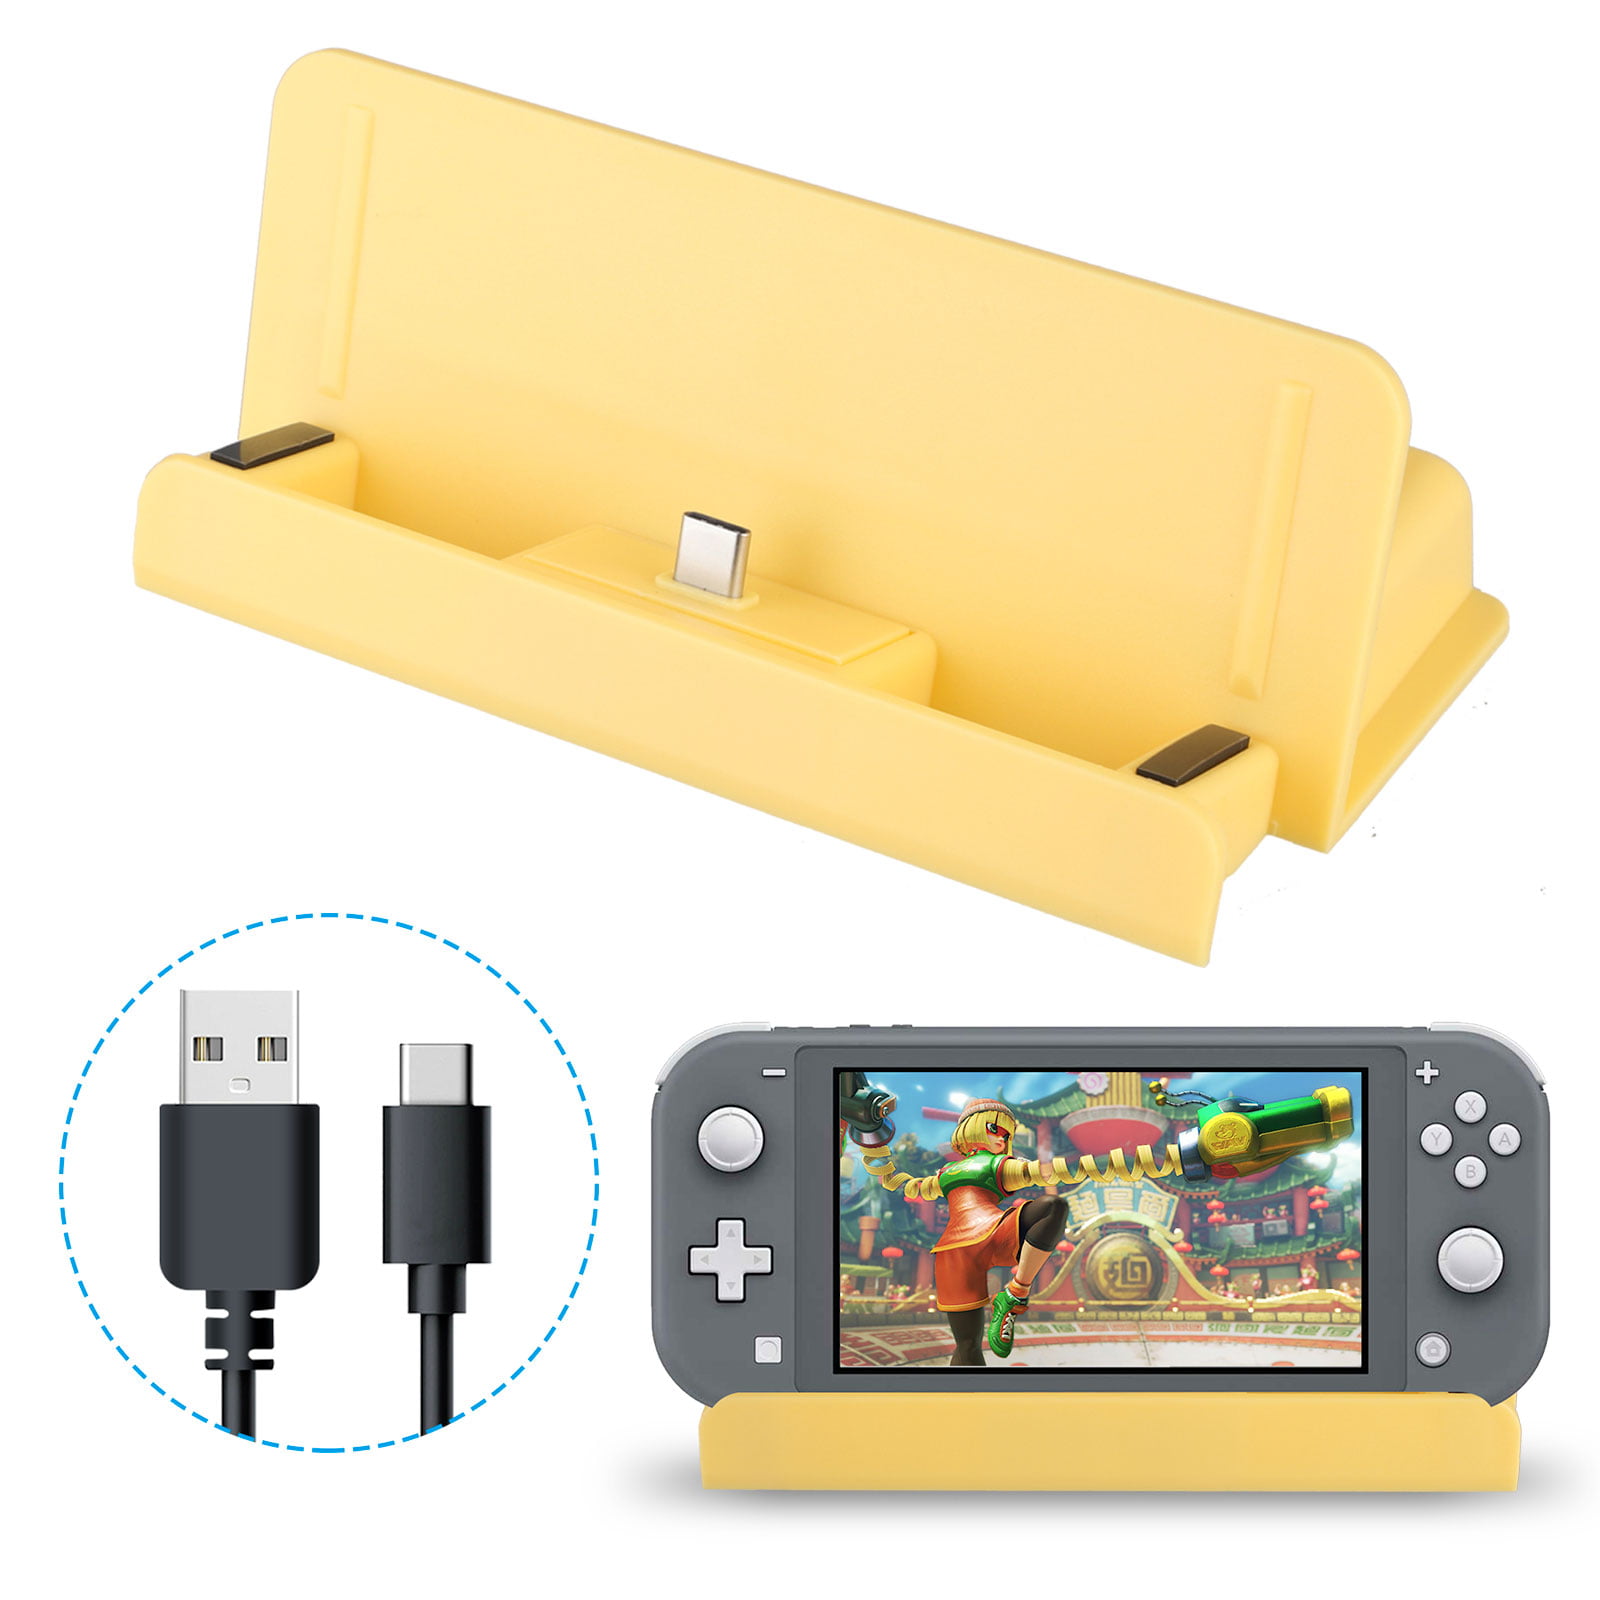 does the nintendo switch come with dock